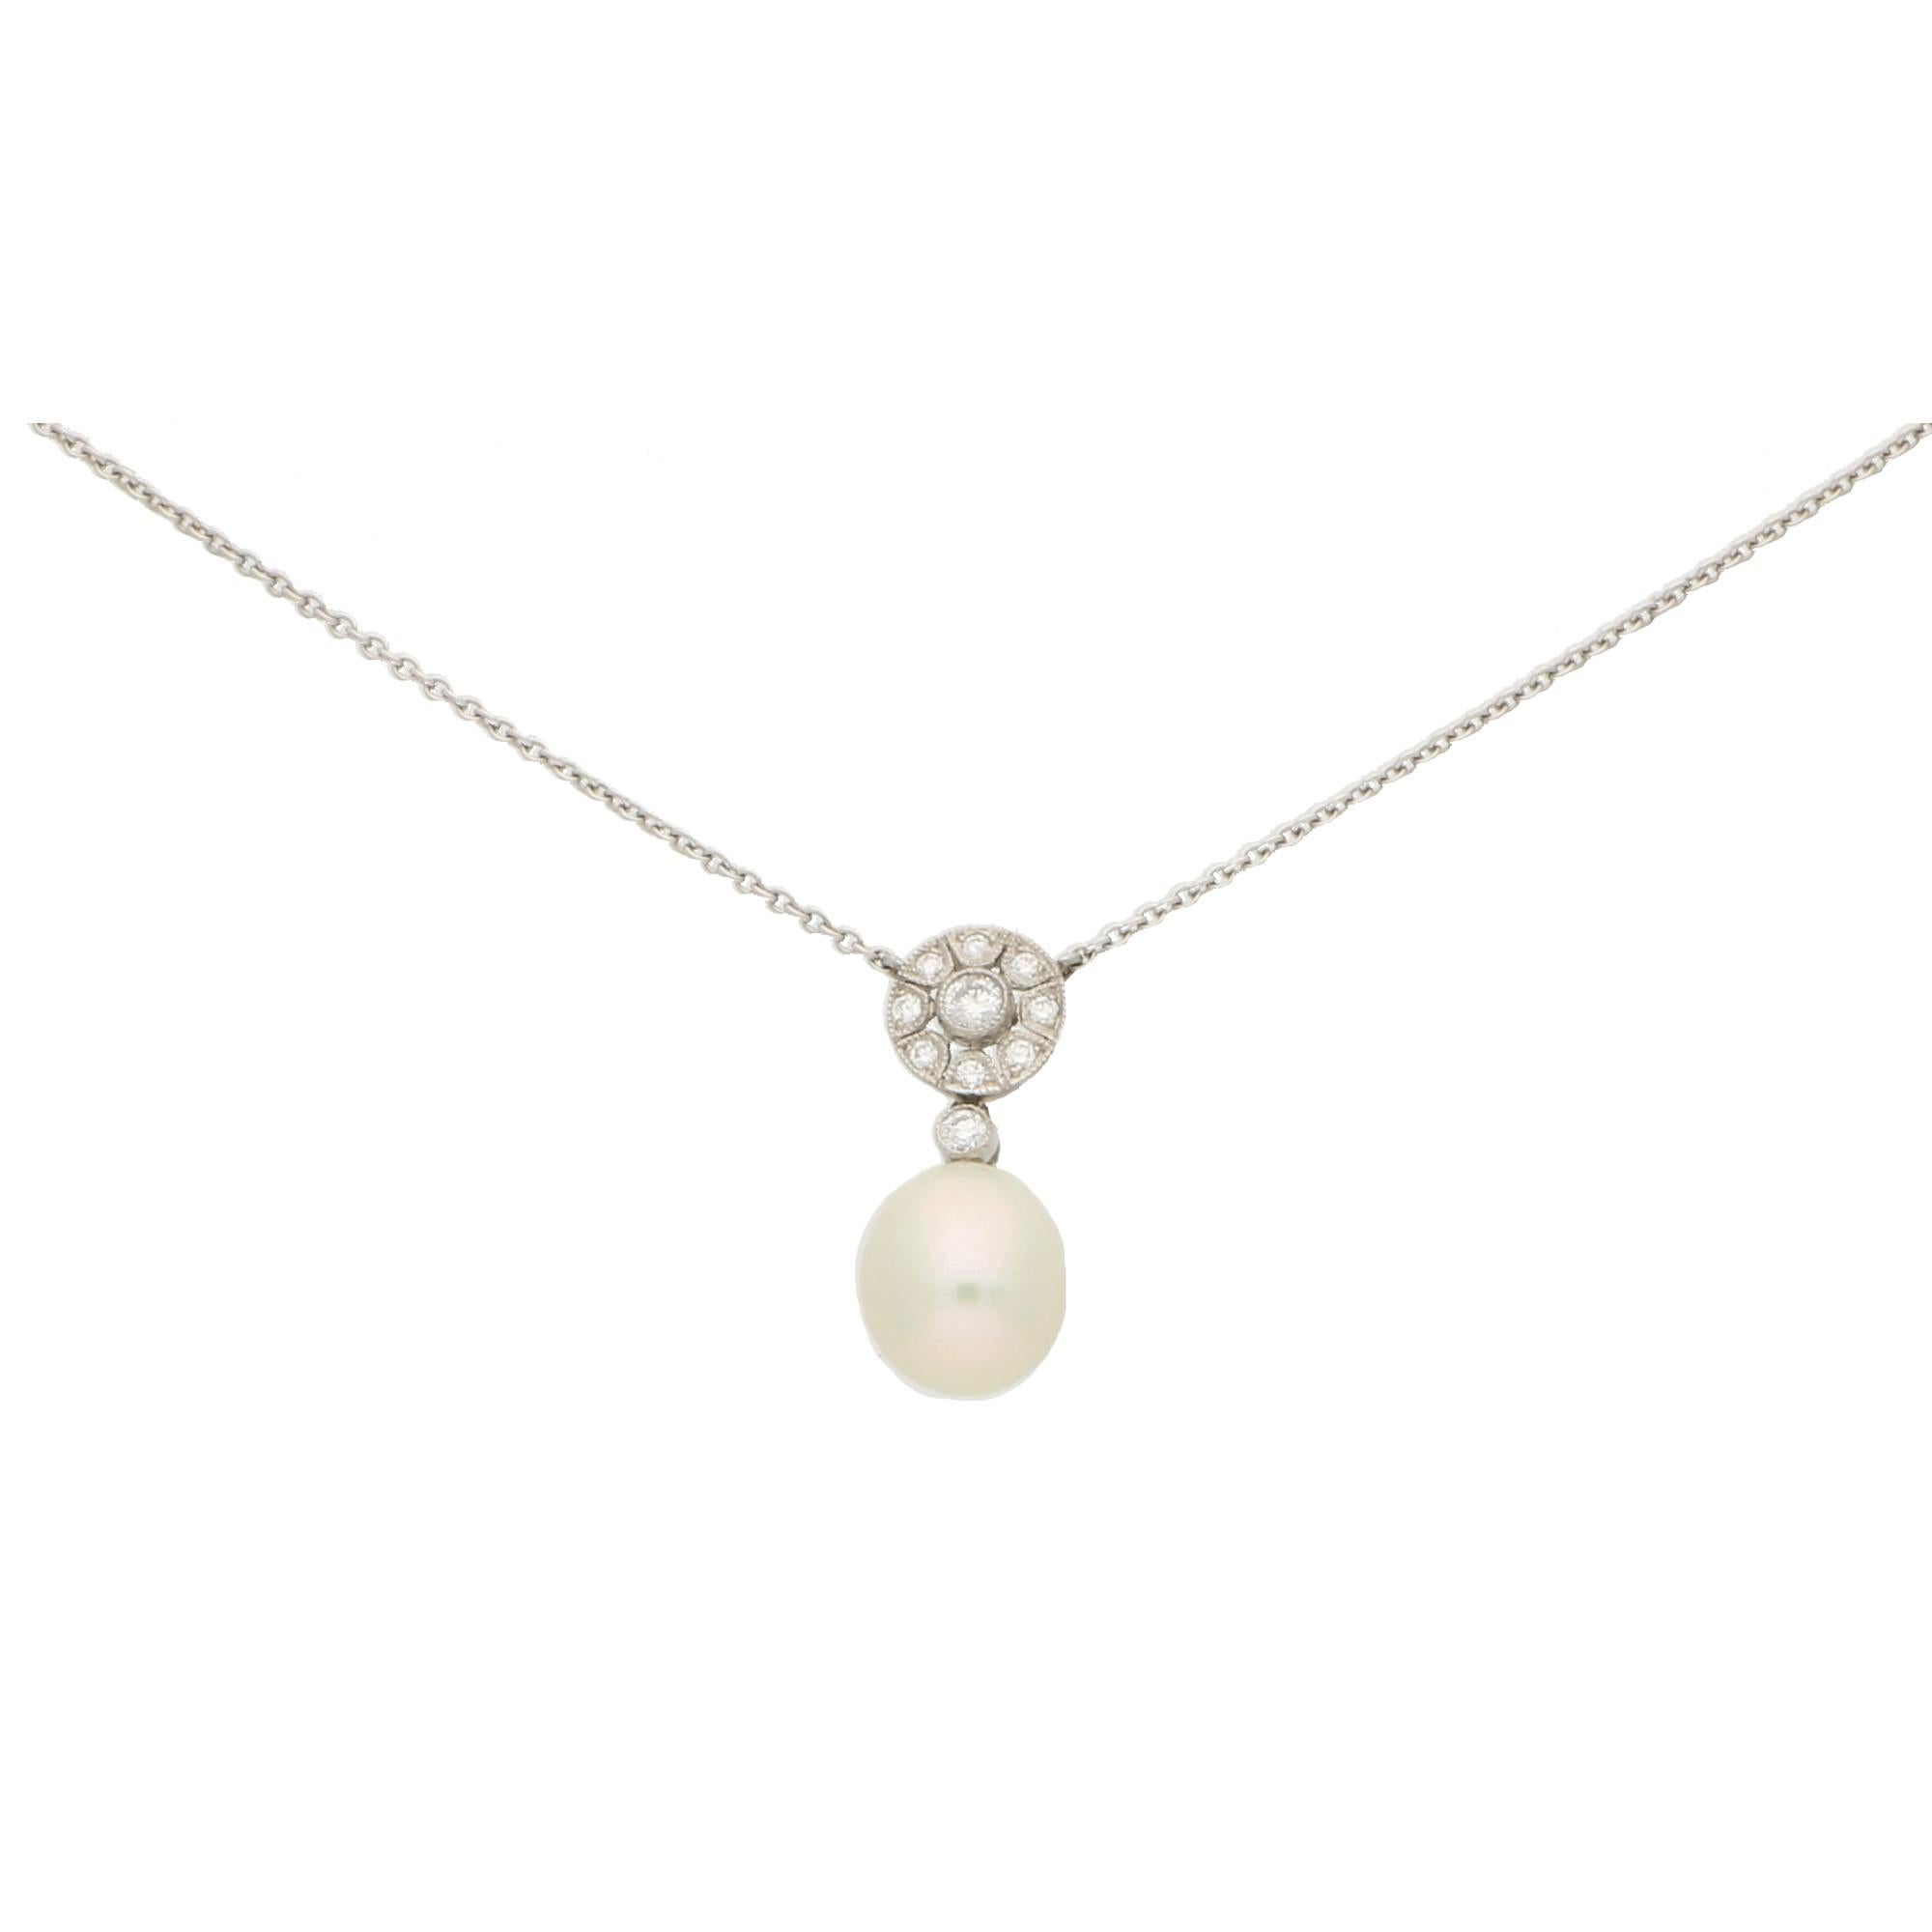 necklace with pearl and diamond